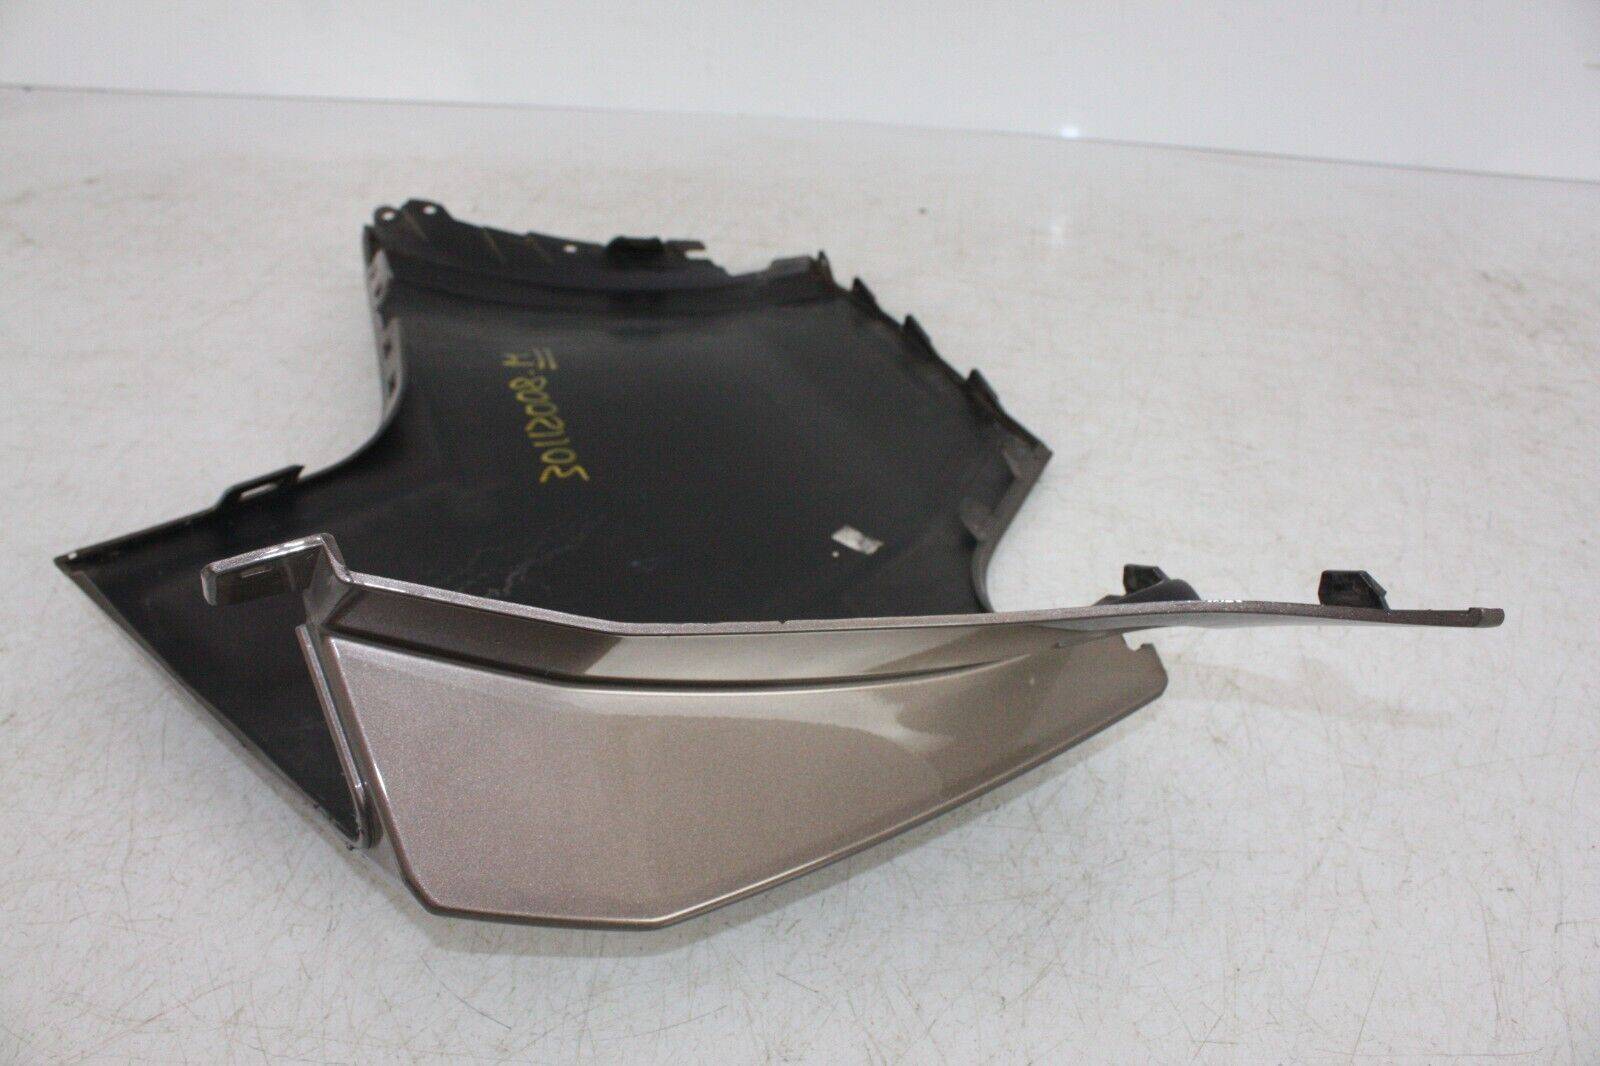 LAND-ROVER-DISCOVERY-SPORT-REAR-BUMPER-LEFT-CORNER-2015-TO-2019-175843085666-10